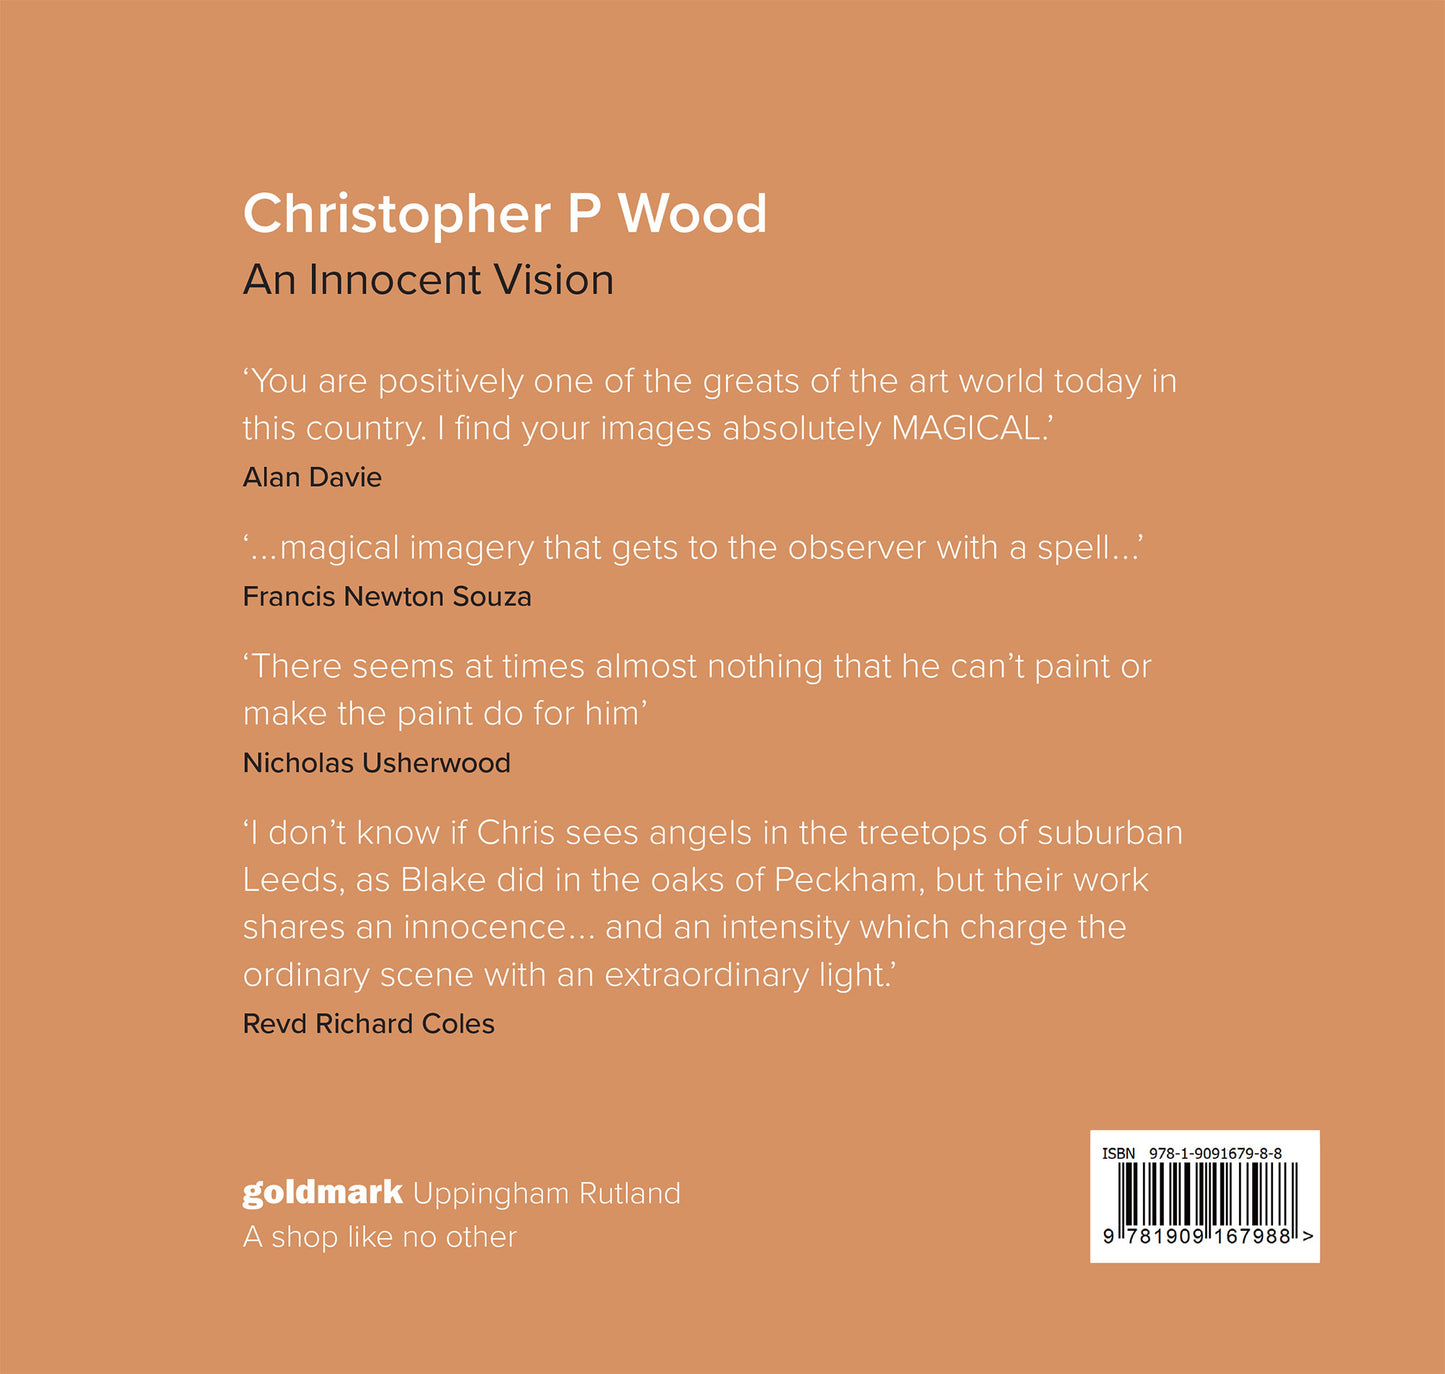 Christopher P Wood - An Innocent Vision